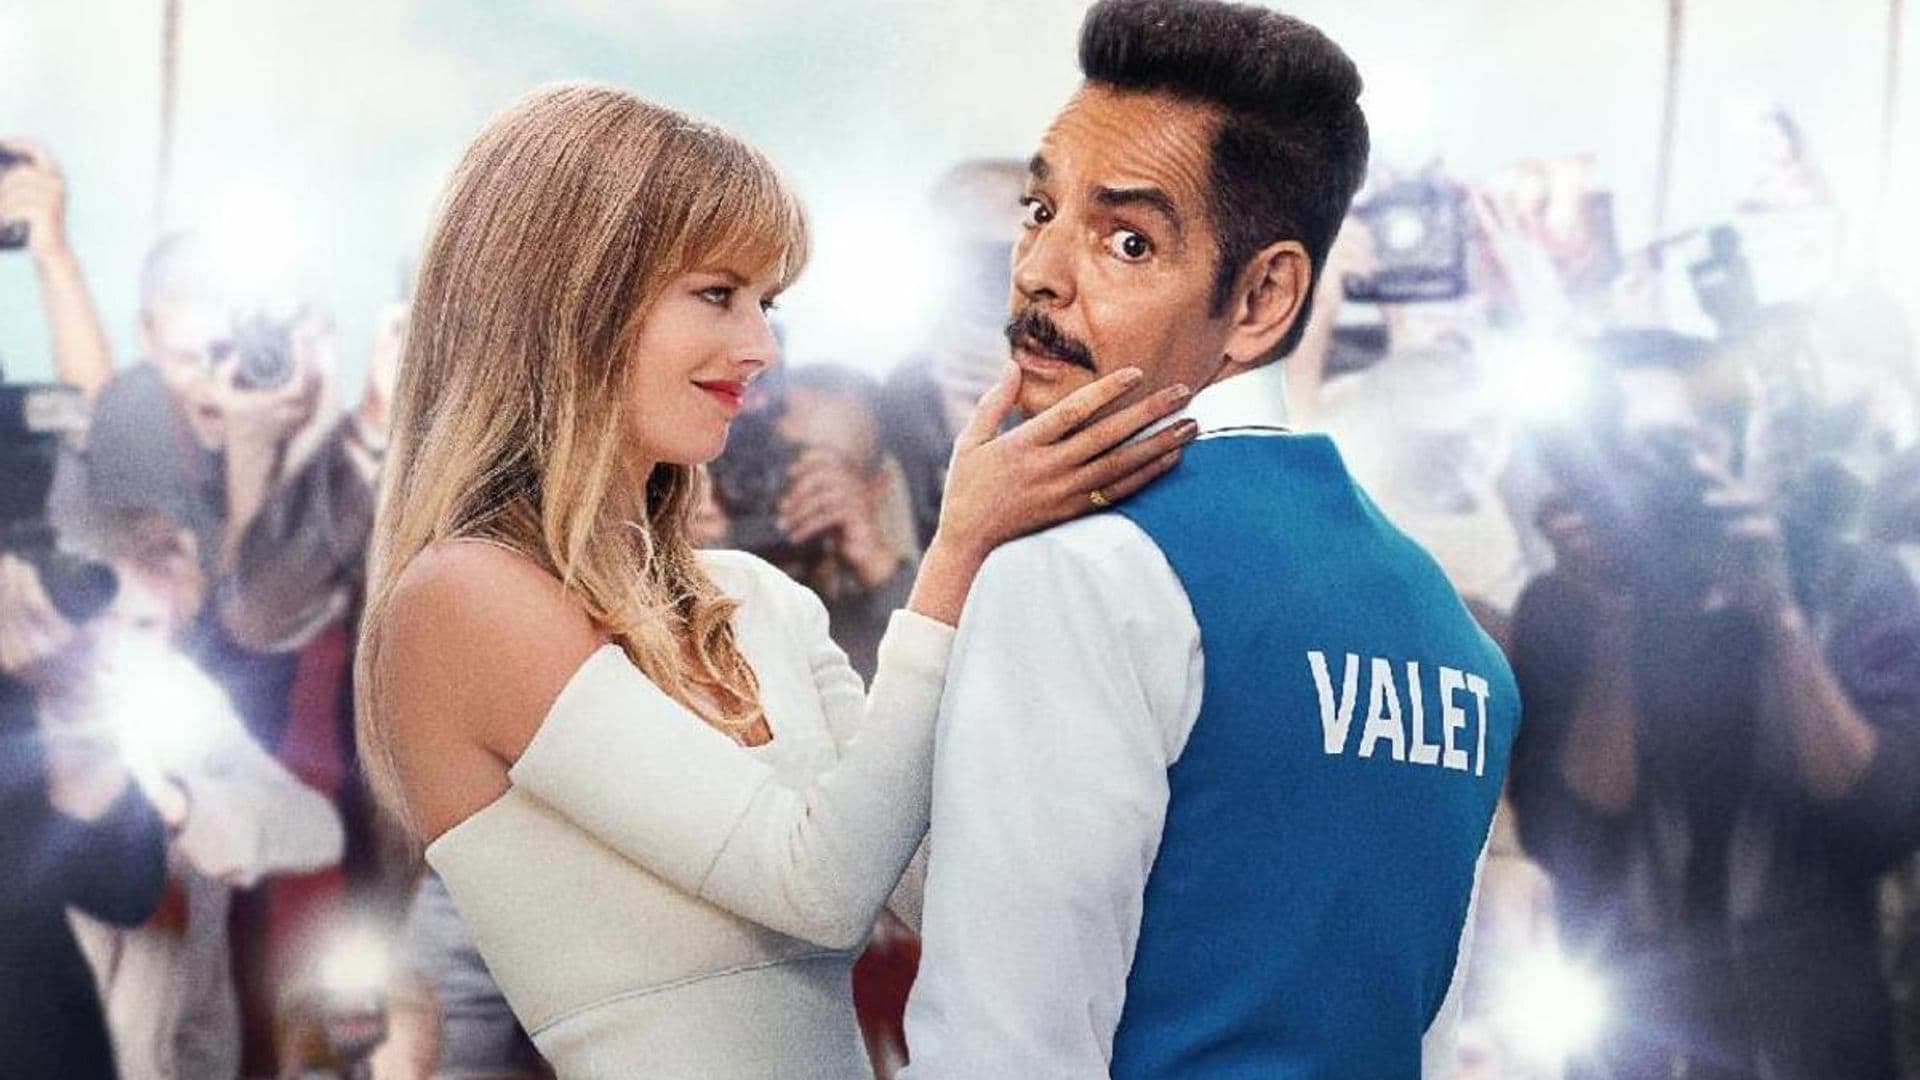 The all-new trailer of Eugenio Derbez’s upcoming movie ‘The Valet’